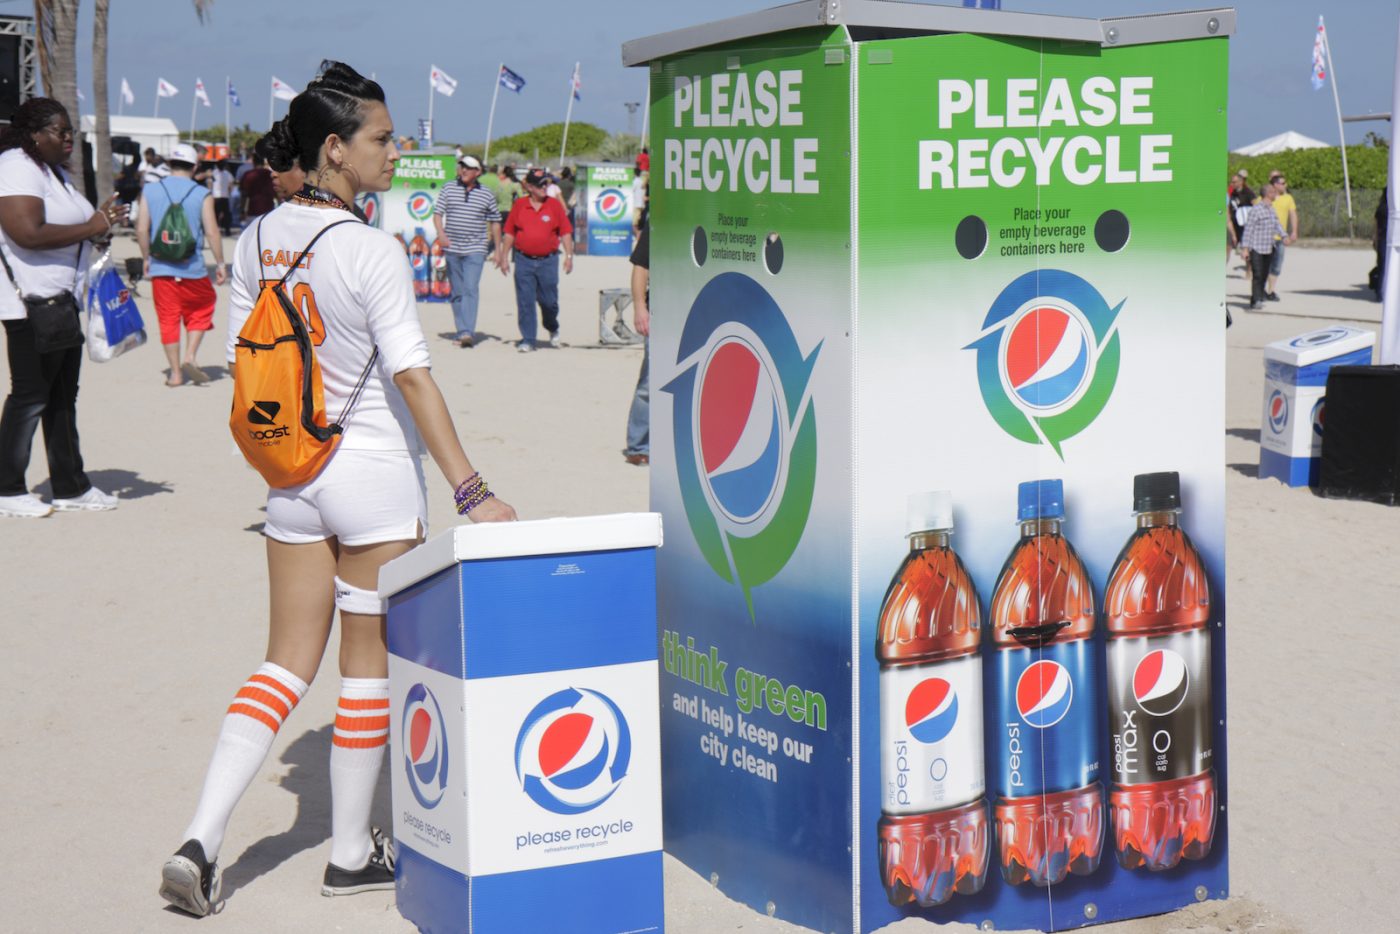 Recycling bins decorated Pepsi bottles and with the Pepsi logo at a sporting event